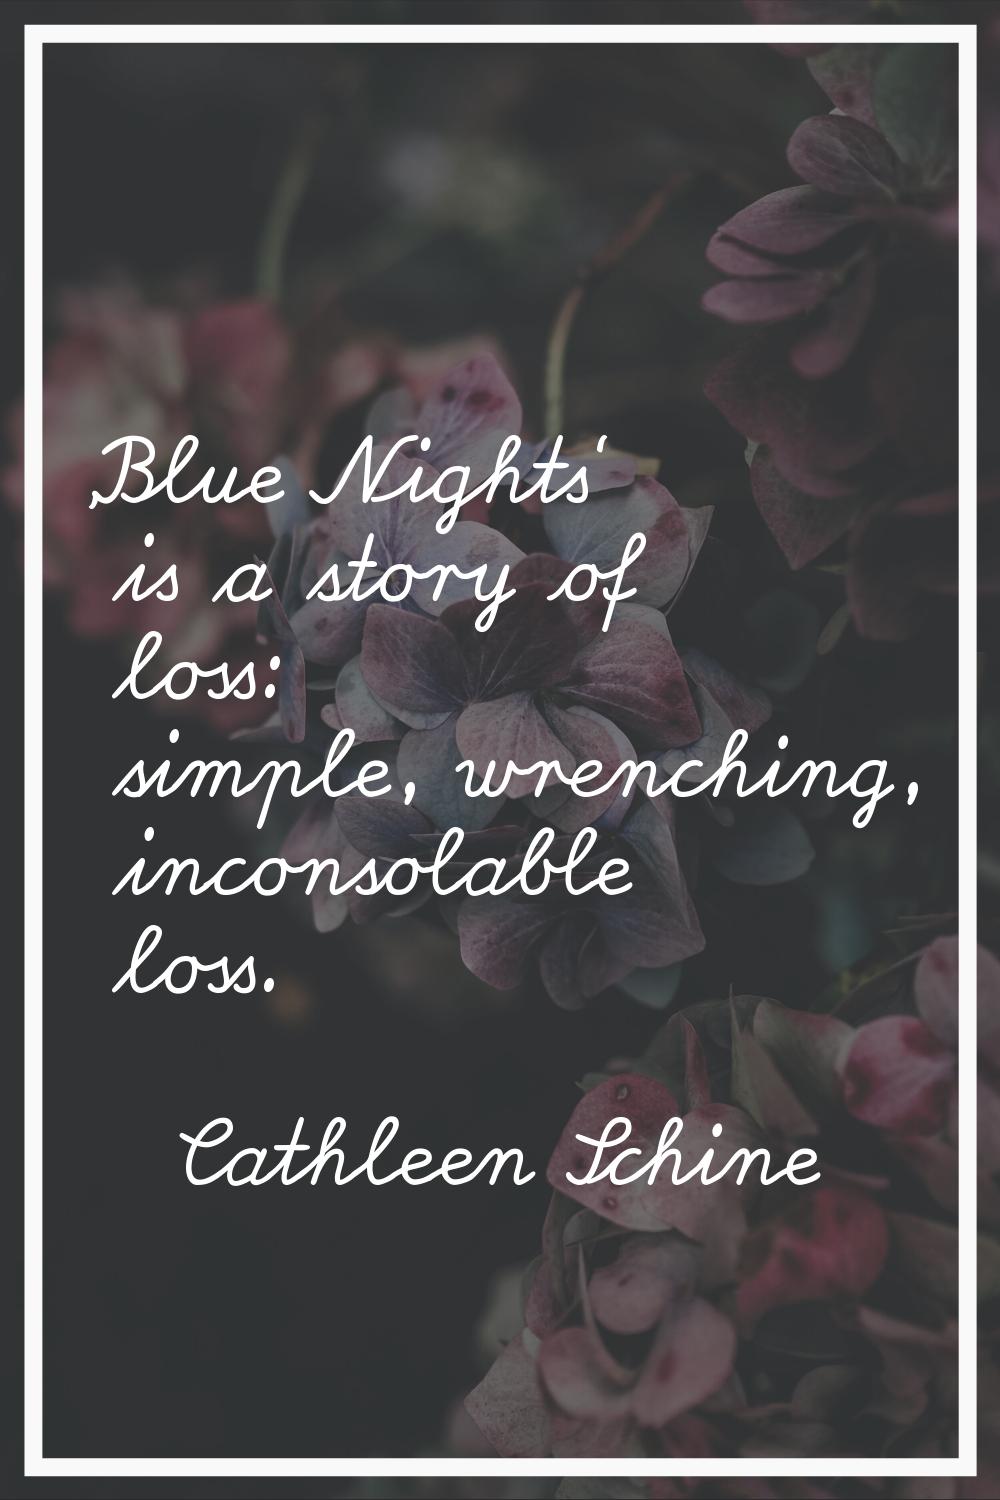 'Blue Nights' is a story of loss: simple, wrenching, inconsolable loss.